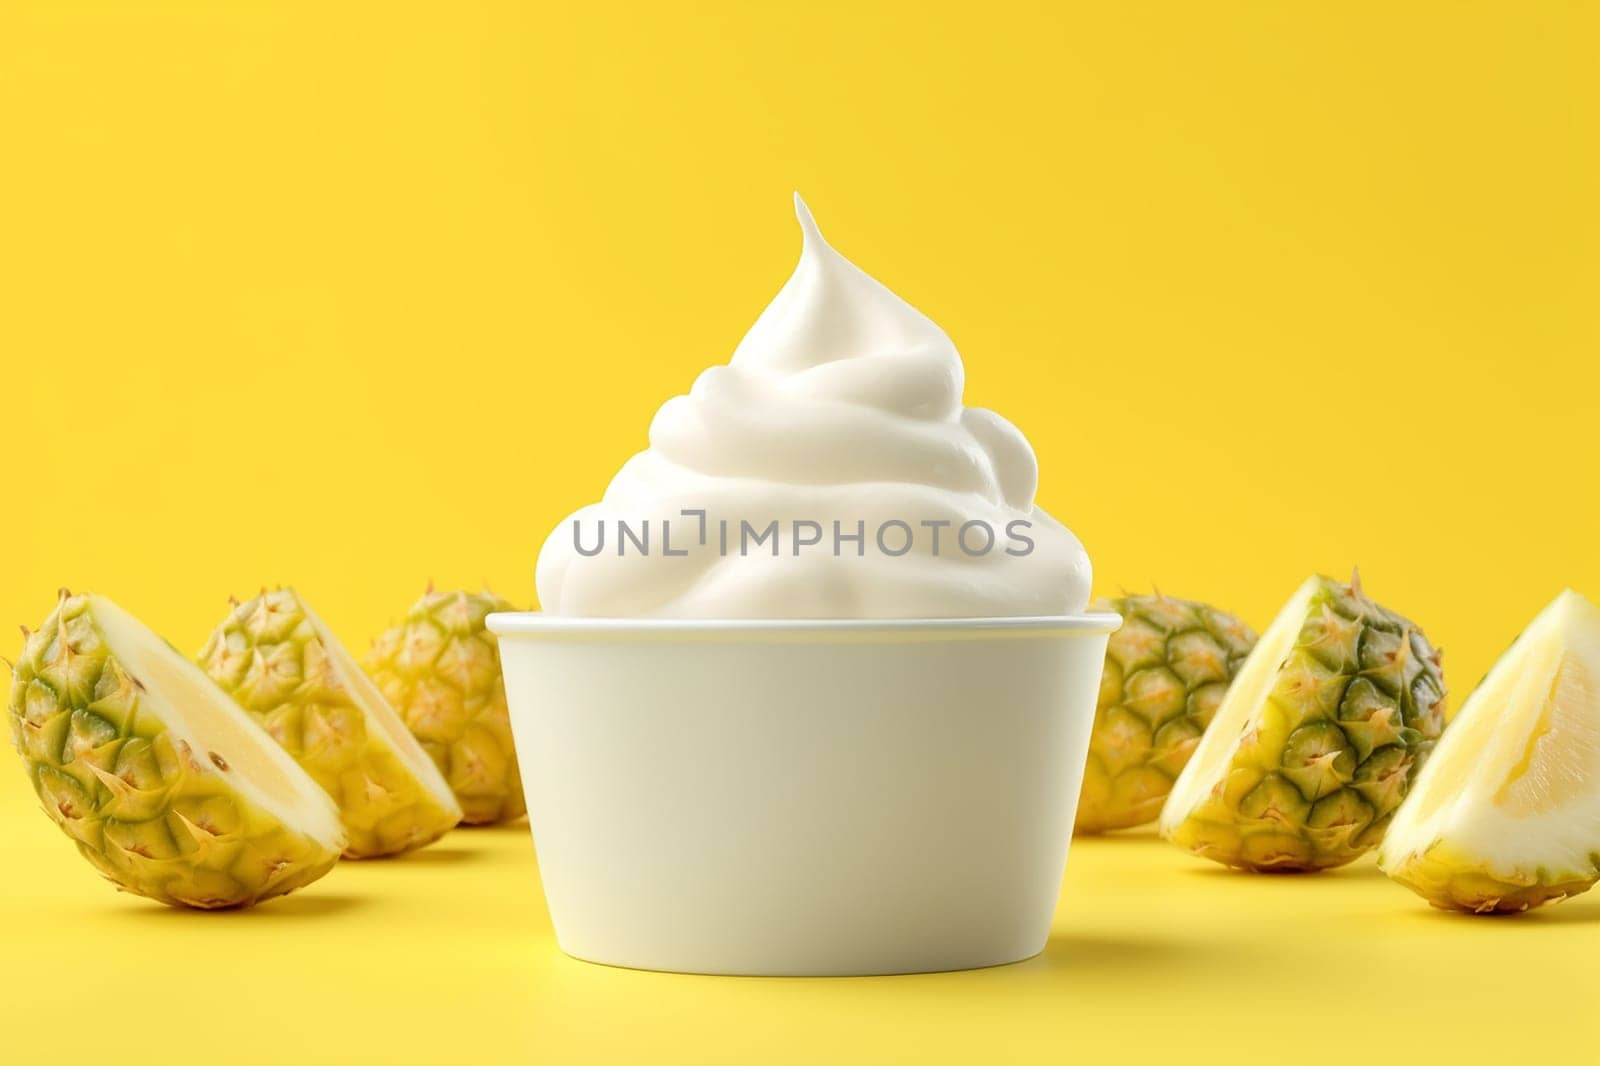 Creamy frozen yogurt with a tangy pineapple flavor.